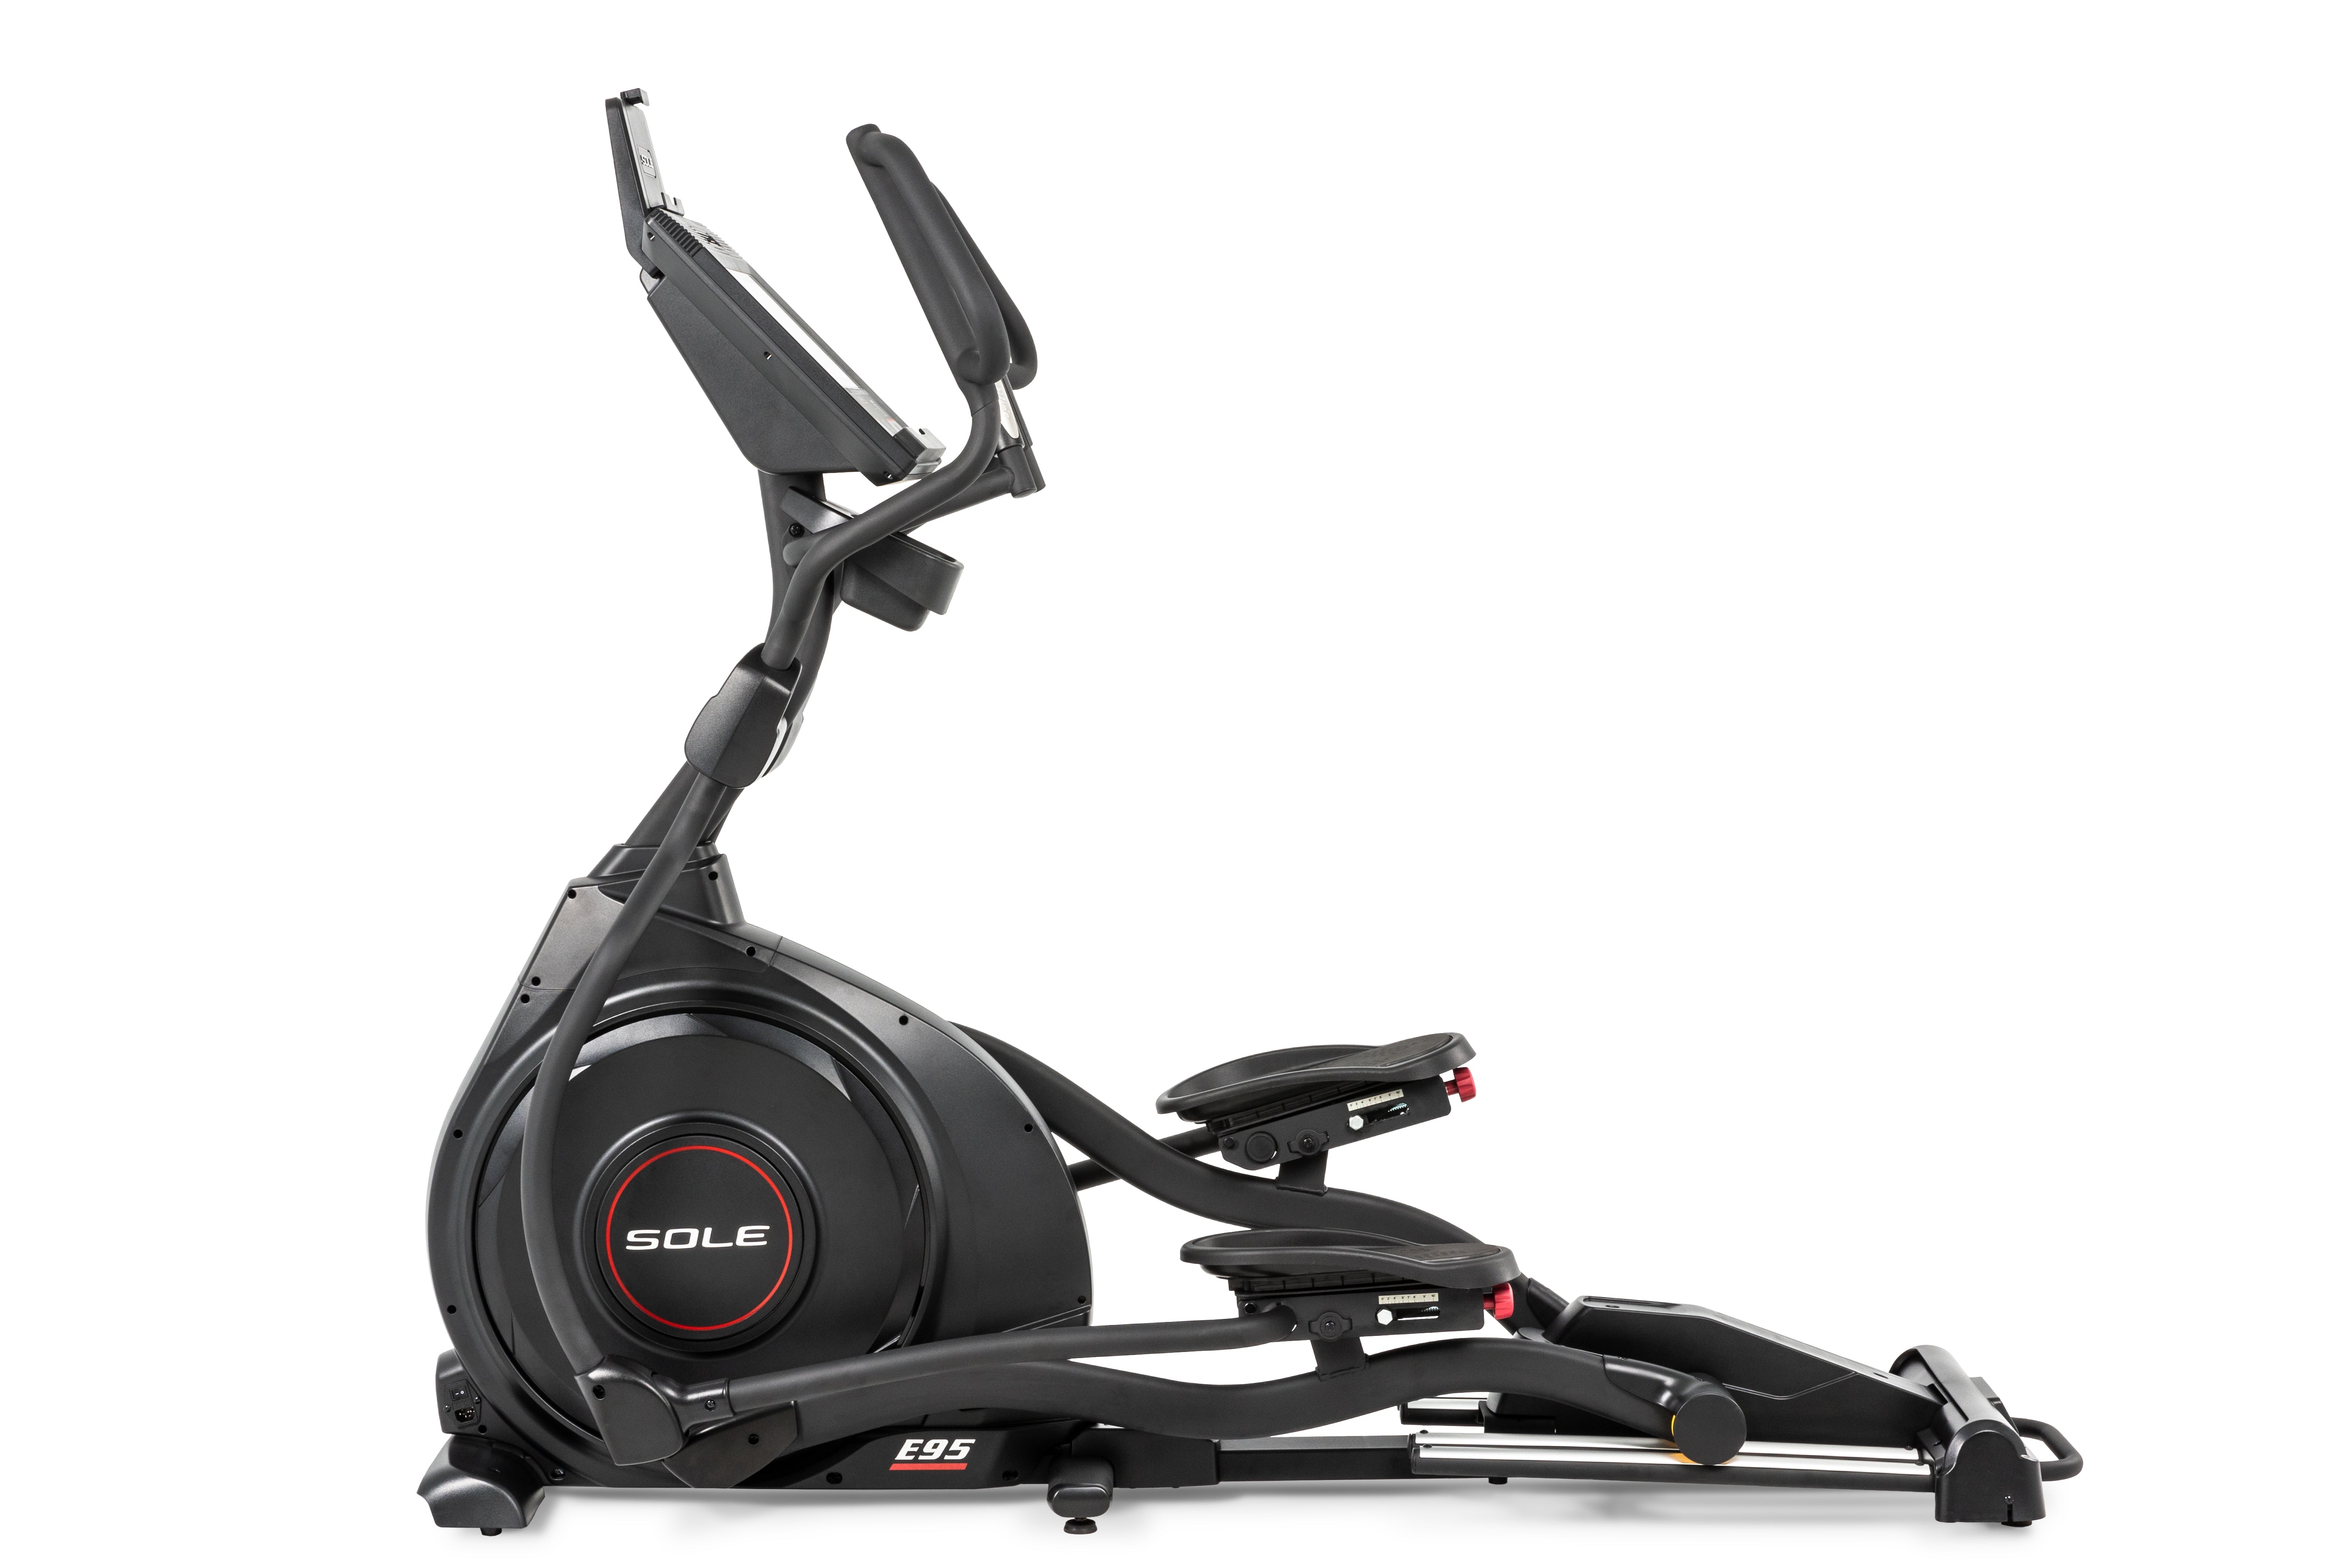 An image of the Sole E95 elliptical trainer, showcasing its side profile with a prominent SOLE logo on the flywheel, adjustable foot pedals, ergonomic handlebars, and a mounted digital display at the top.